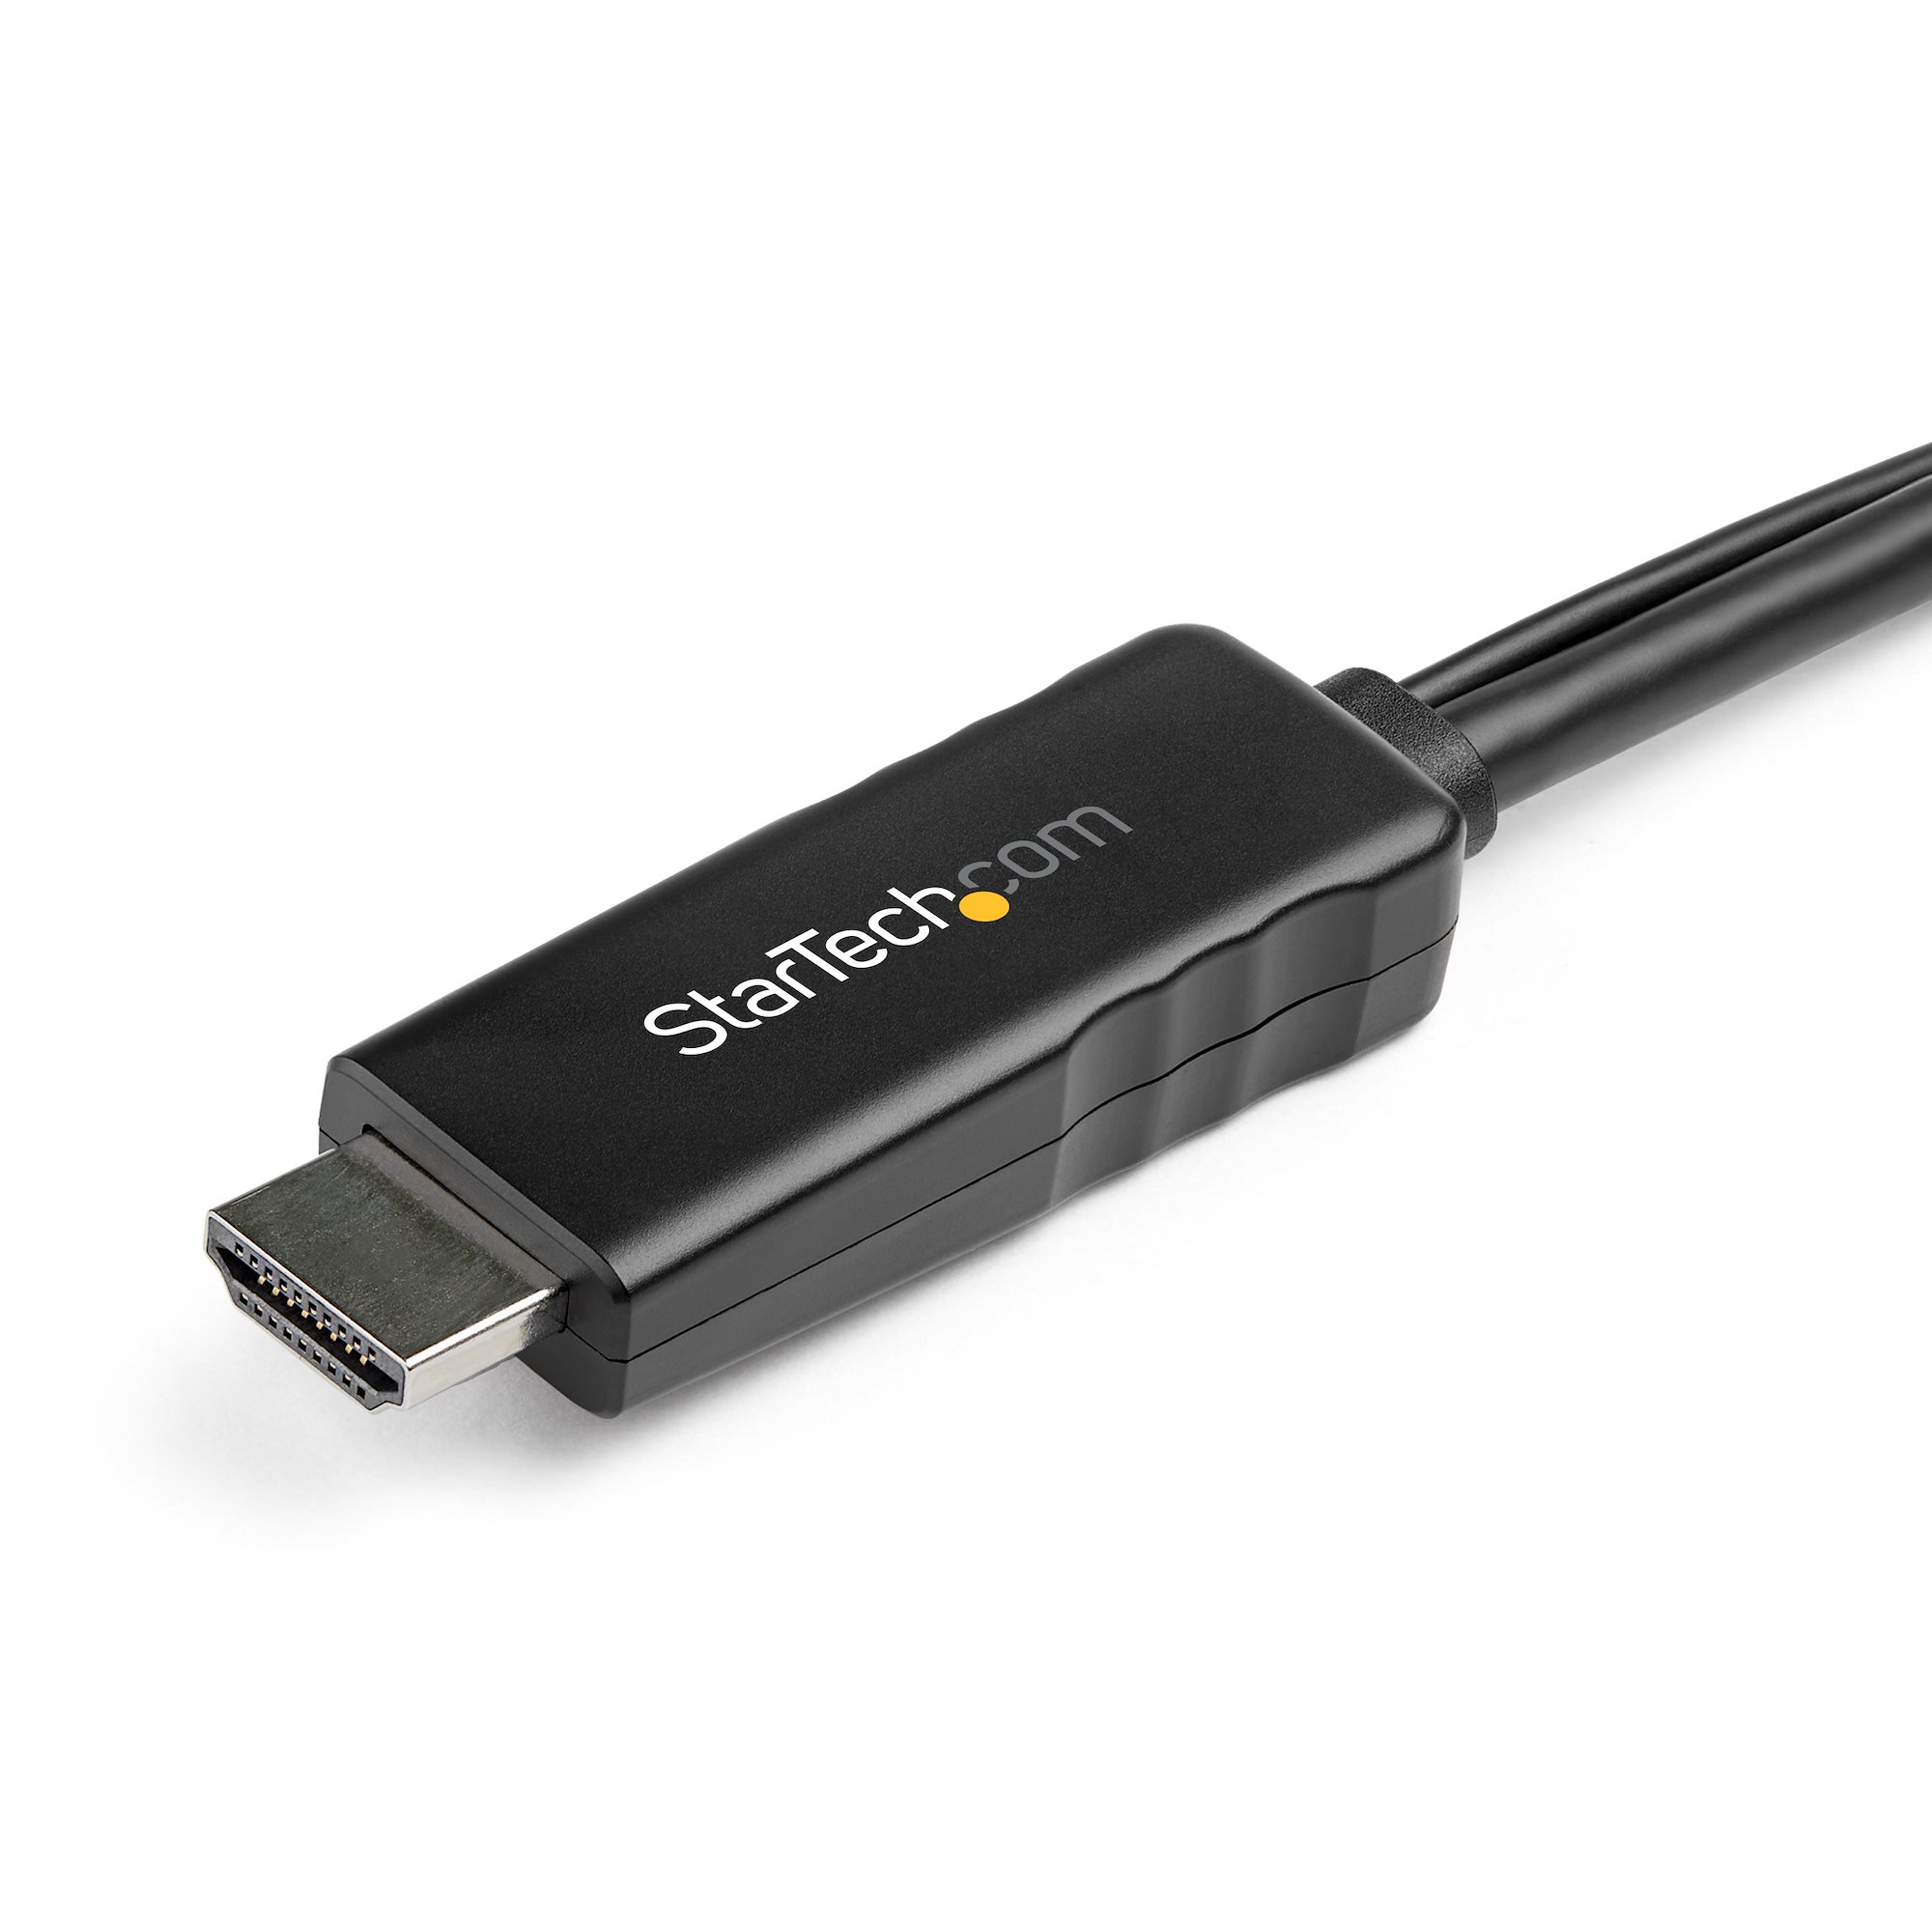 Adapter - HDMI to DisplayPort Cable - 4K - Video Converters